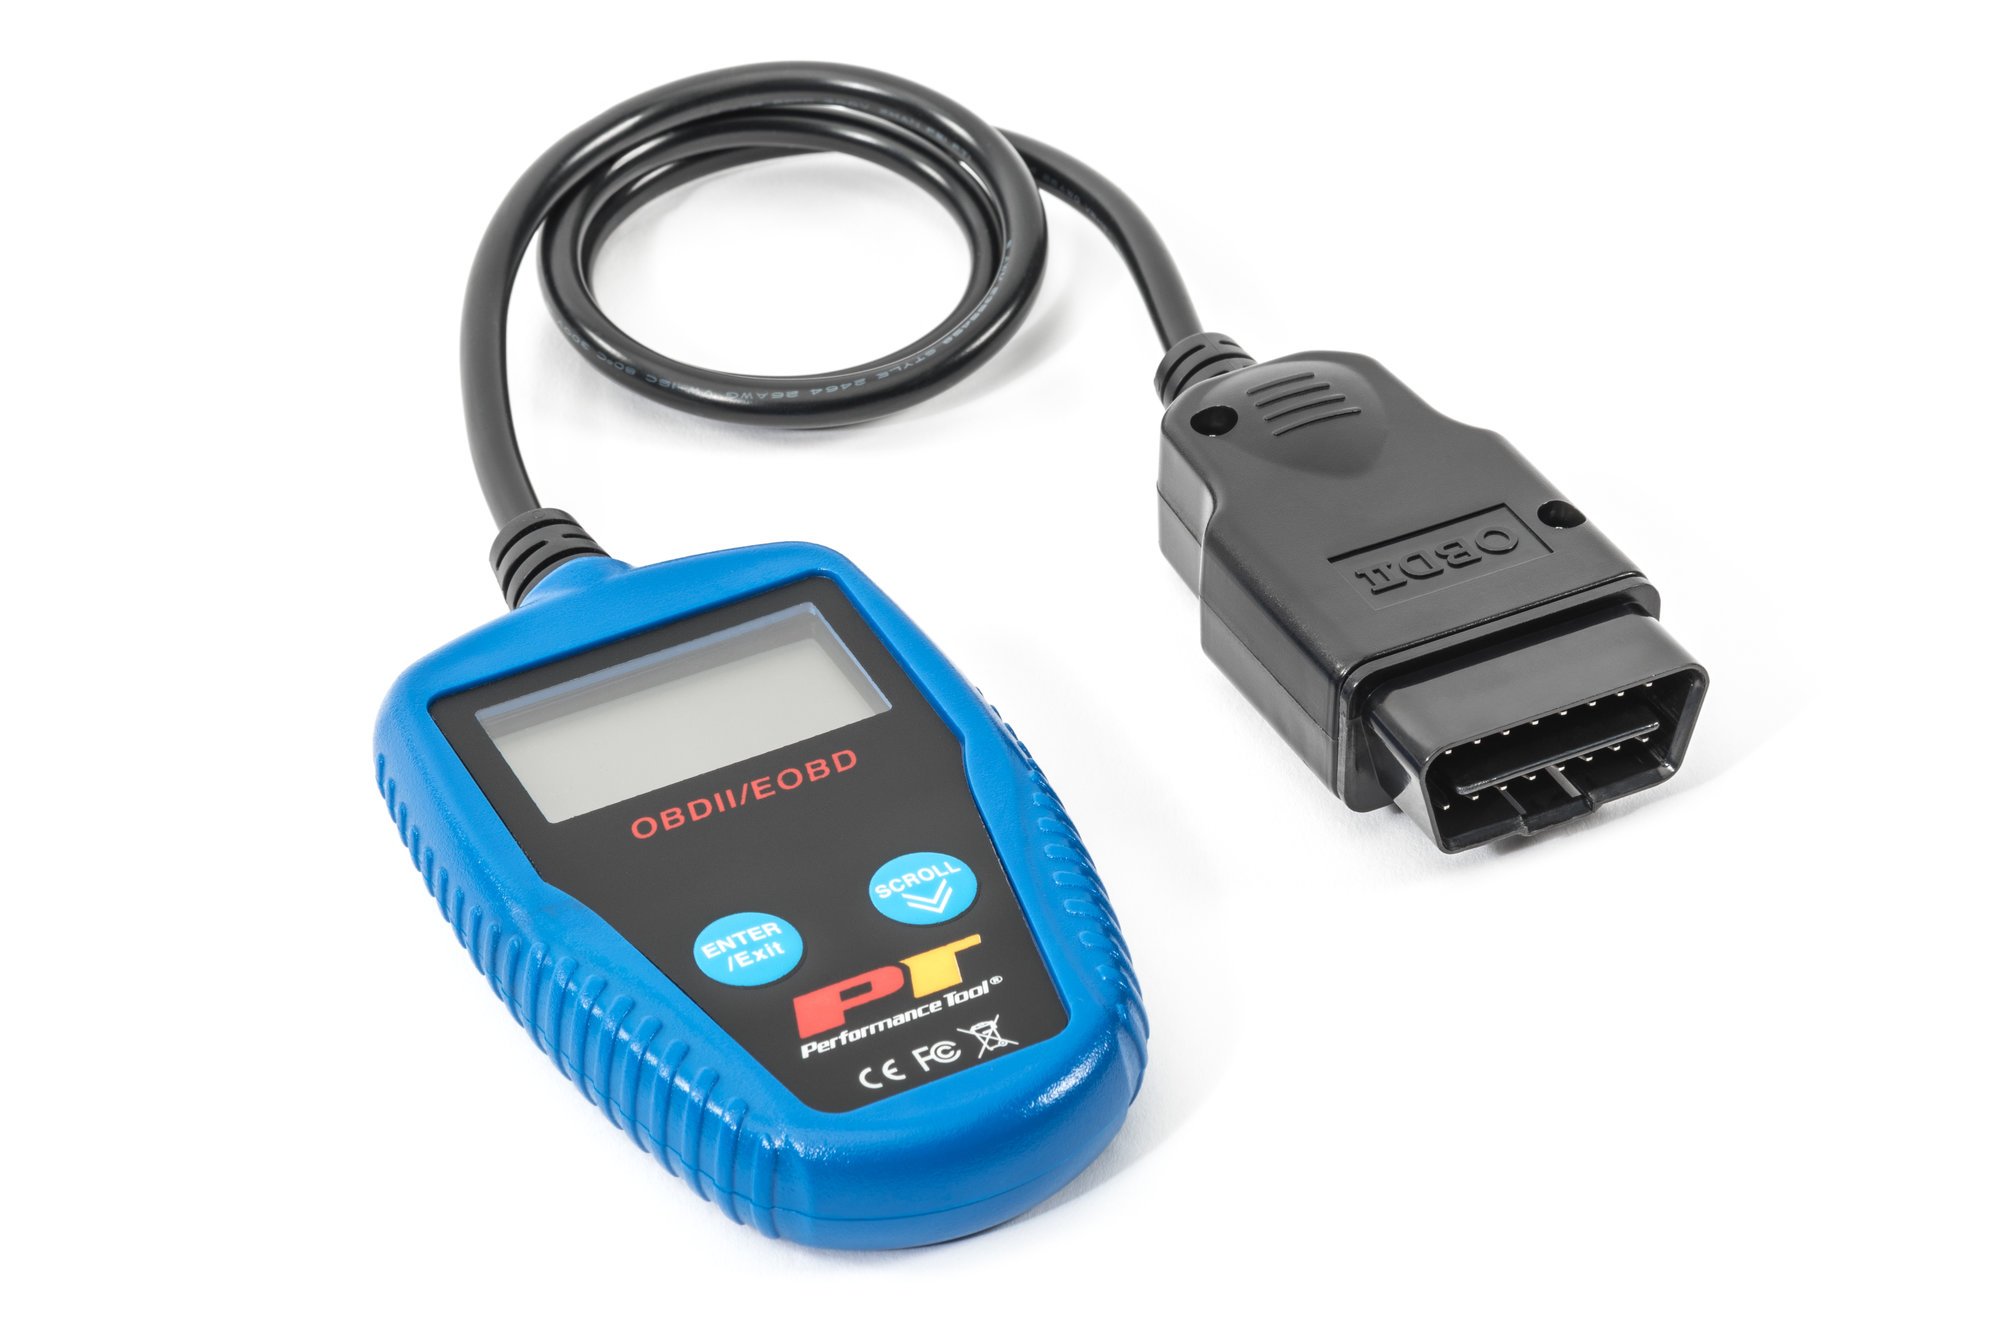 https://www.quadratec.com/sites/default/files/styles/product_zoomed/public/product_images/Performance-Tool-W2976-Multilingual-OBD2-Scan-Tool-Universal-Tabletop-Main.jpg